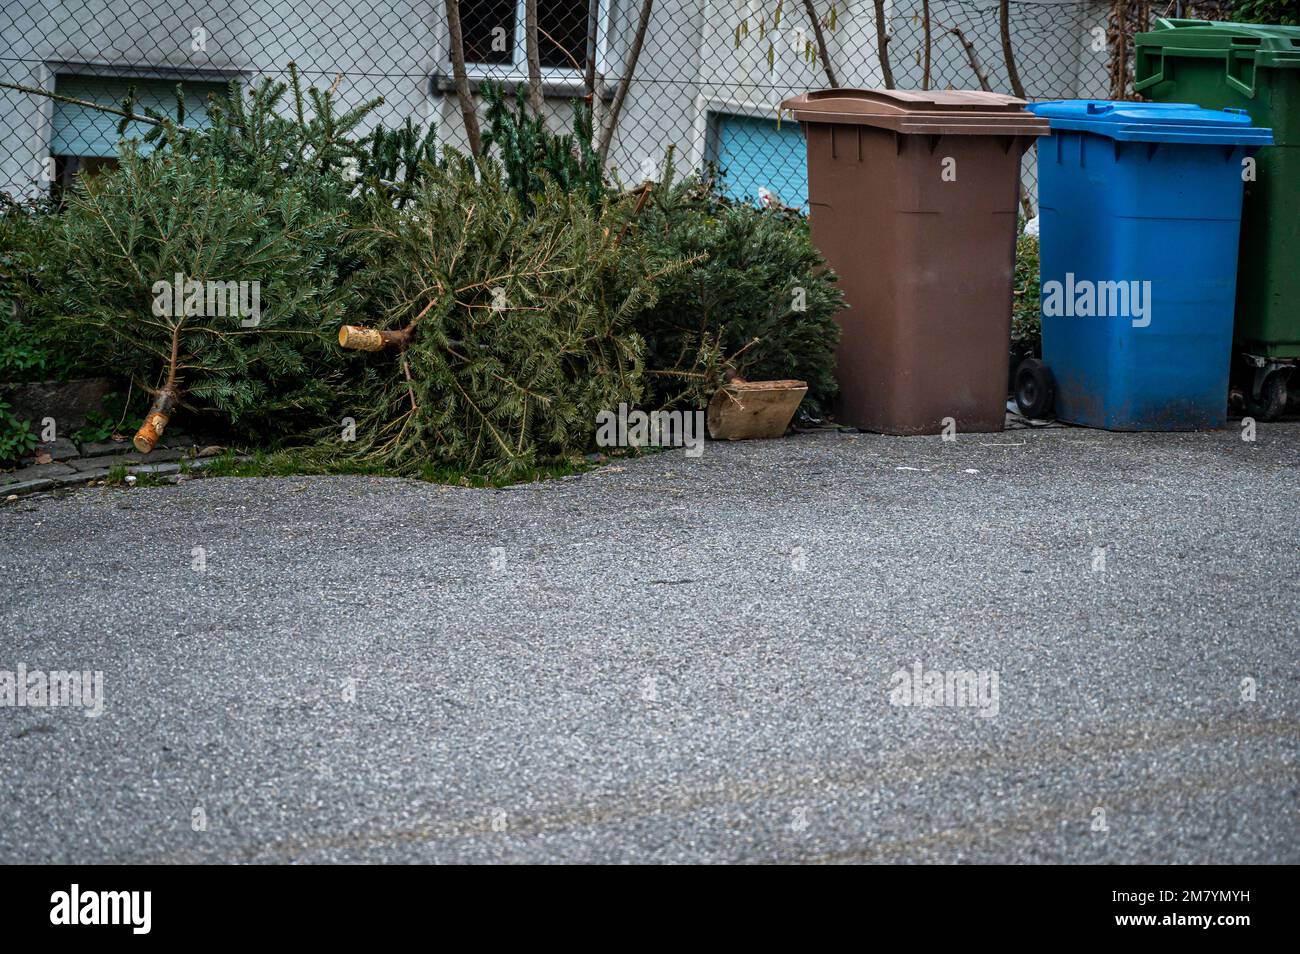 Abandoned Christmas trees in the street beside garbage bin after the ...